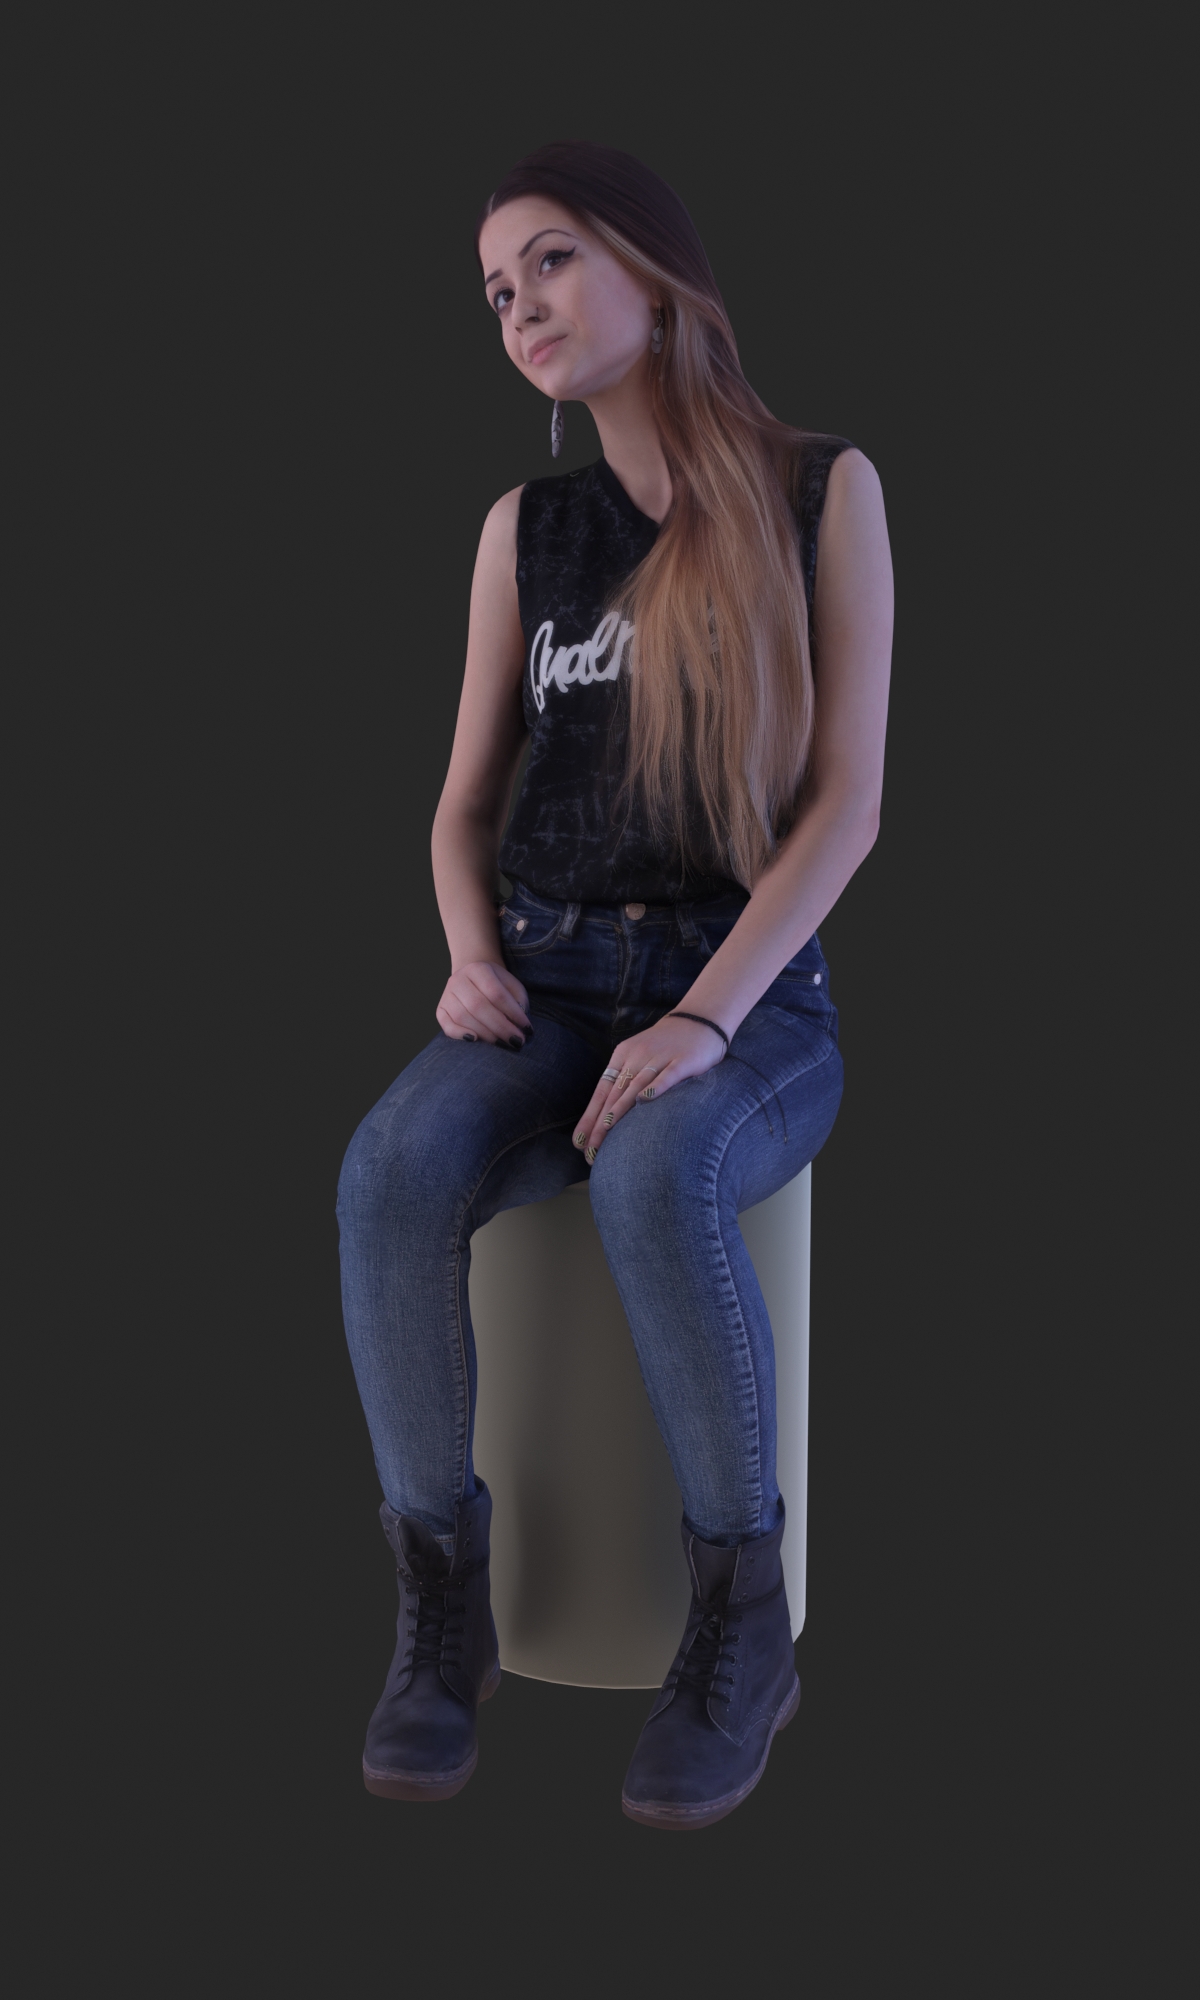 3DSKY FREE – HUMAN 3D – POSED PEOPLE – No.012